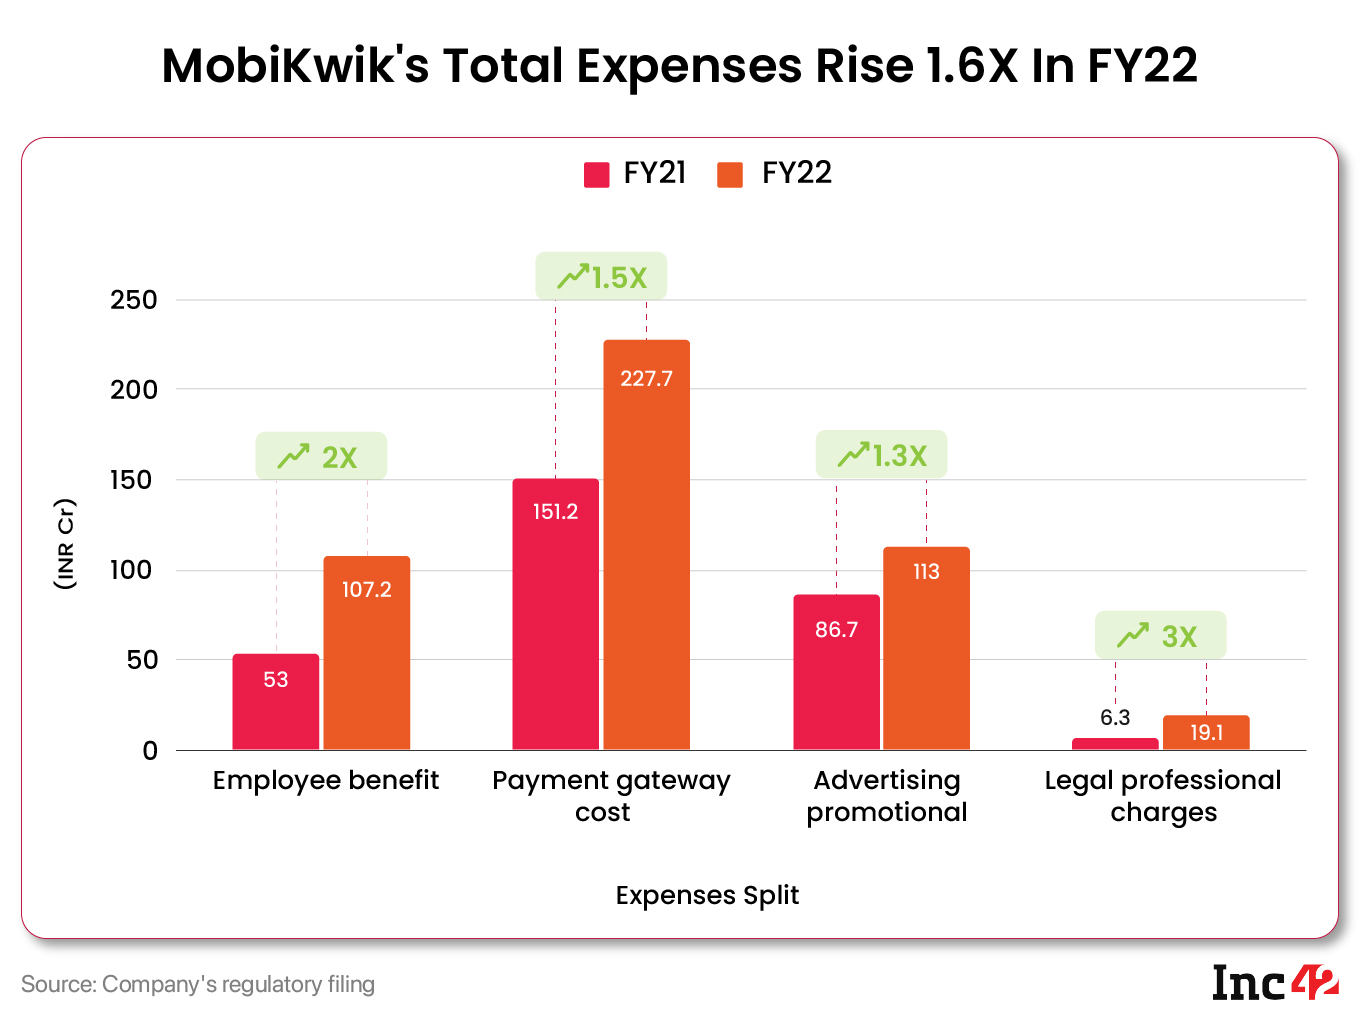 MobiKwik’s Loss Widens 15% To INR 128.2 Cr Amid Stalled IPO Plans